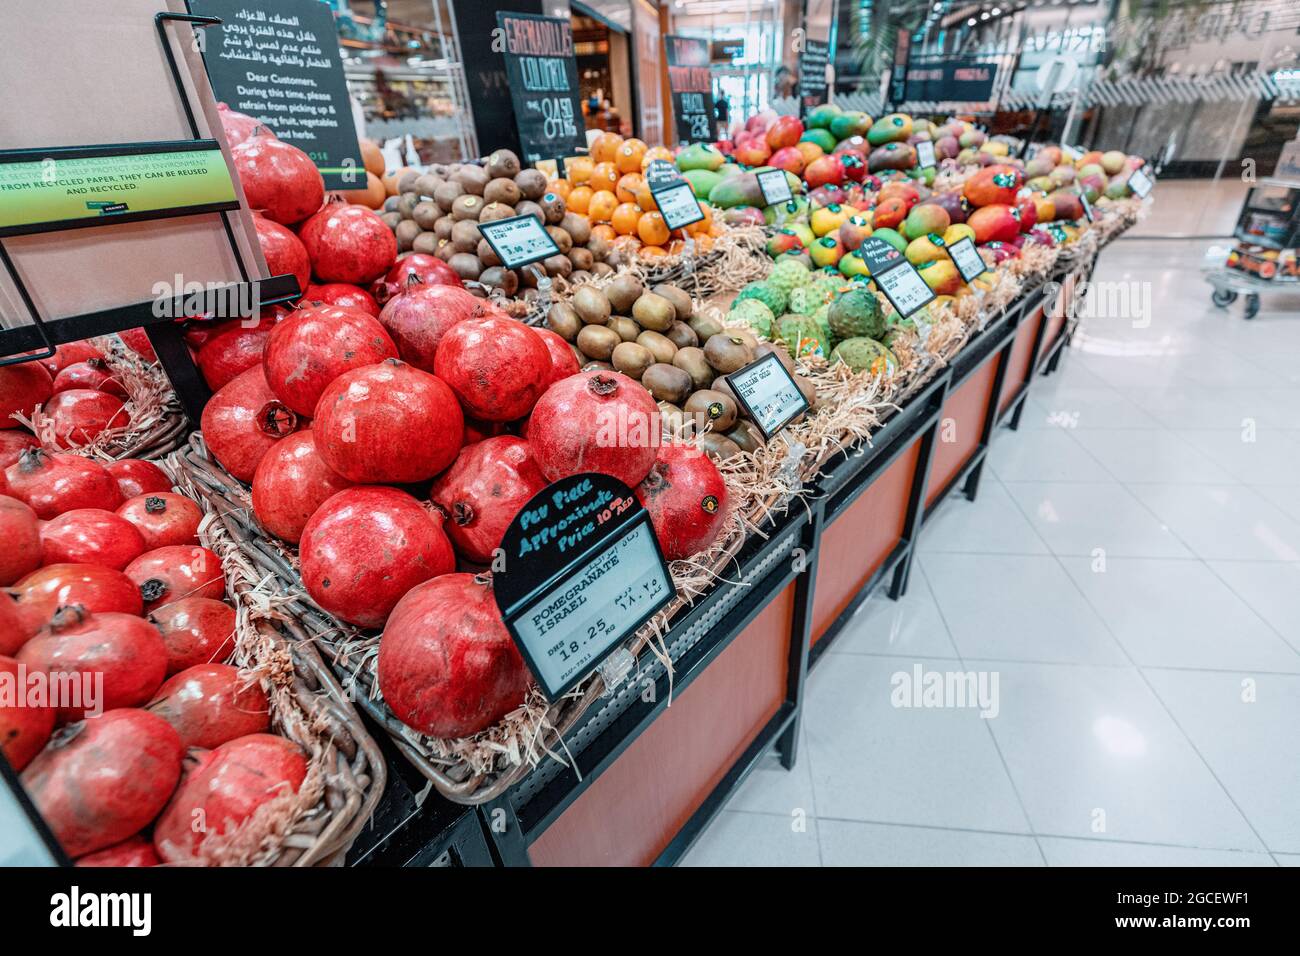 23 February 2021, Dubai, UAE: Ripe Pomegranate from Israel with a price tag in dirhams is sold in a supermarket in Dubai Stock Photo